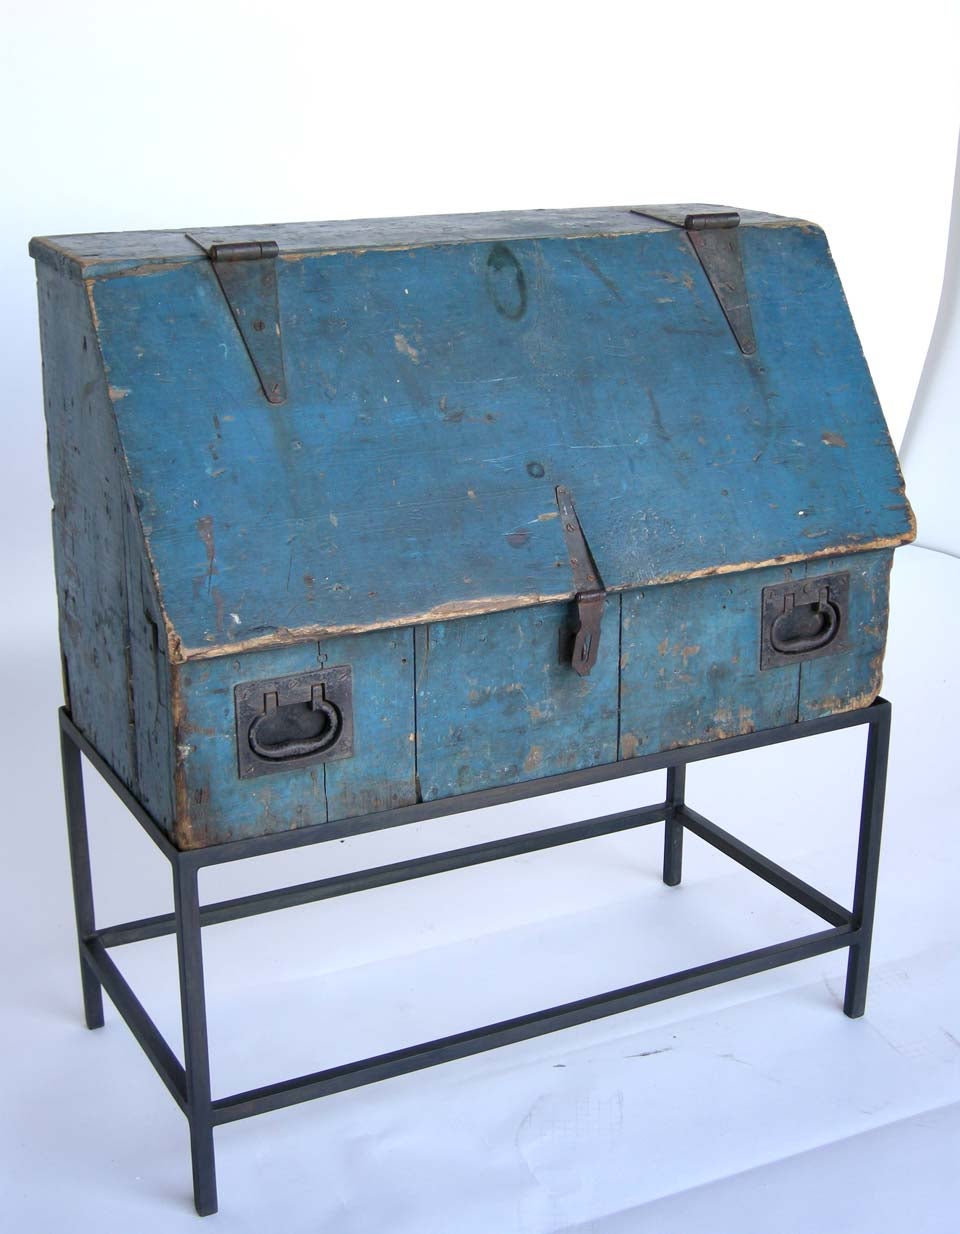 Primitive Painted Tool Chest